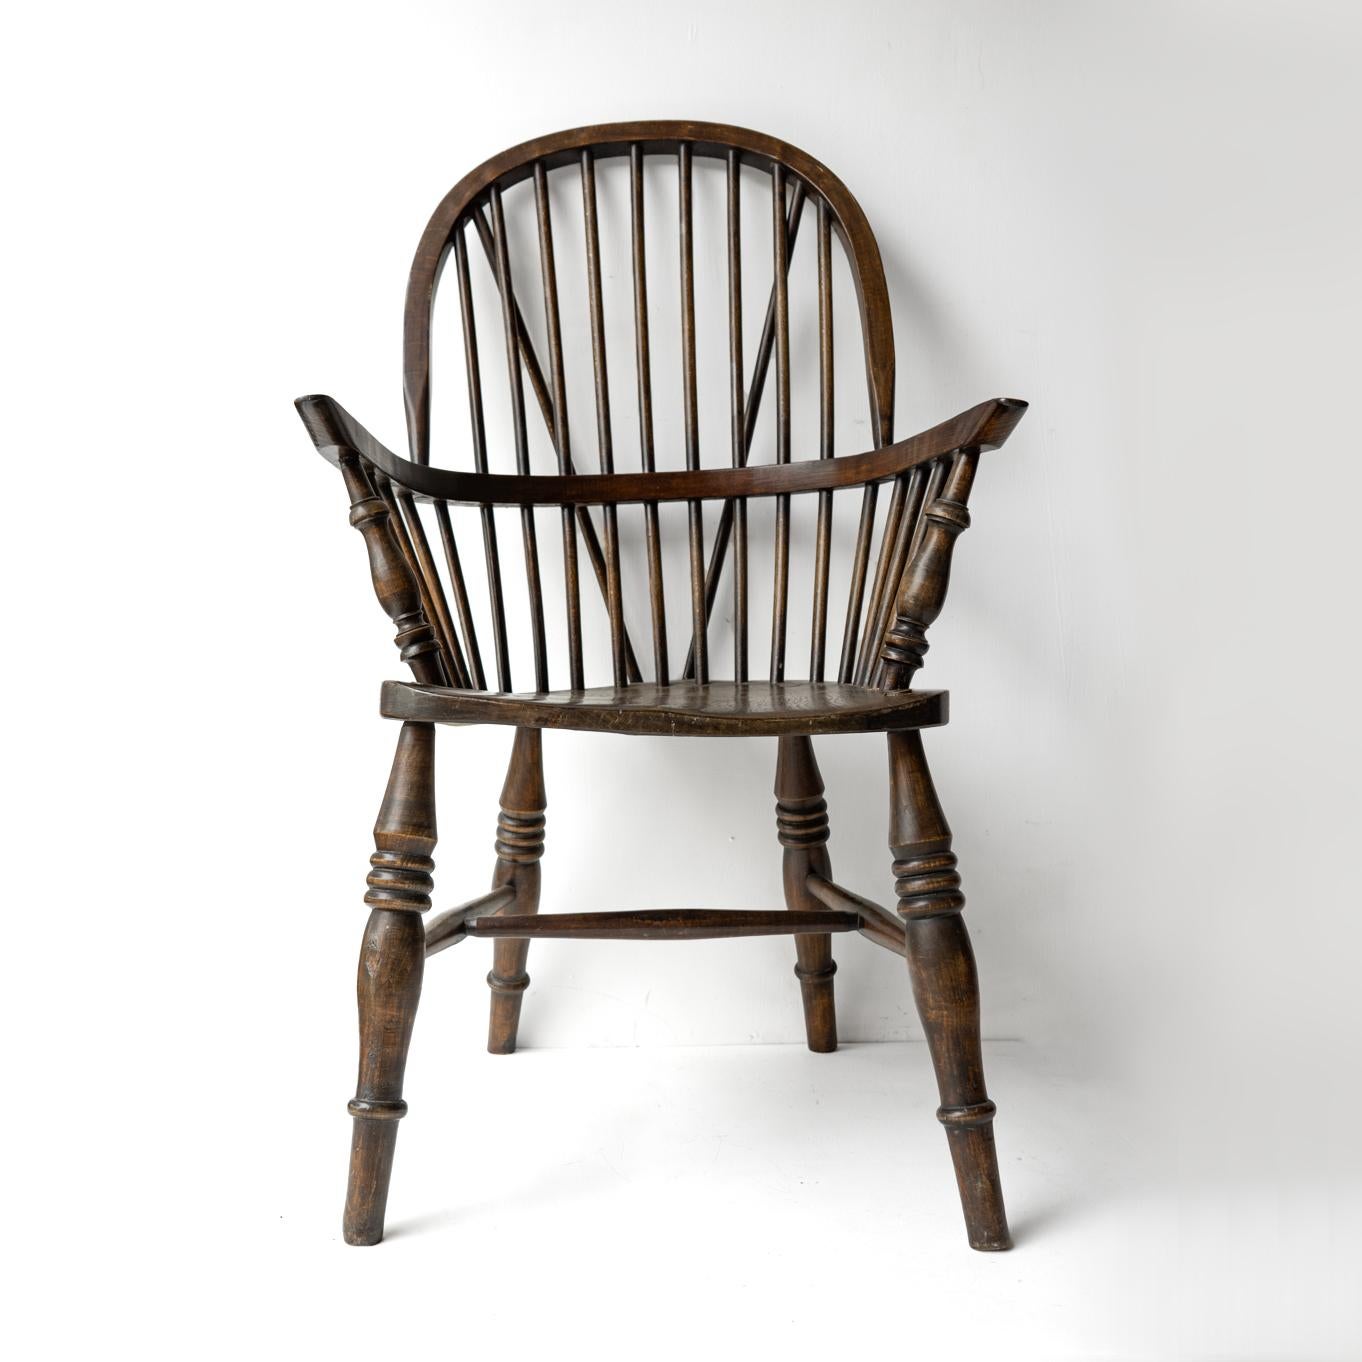 Carved STICK BACK ASH & ELM WINDSOR CHAIR, Antique Rustic Country Made Carver armchair